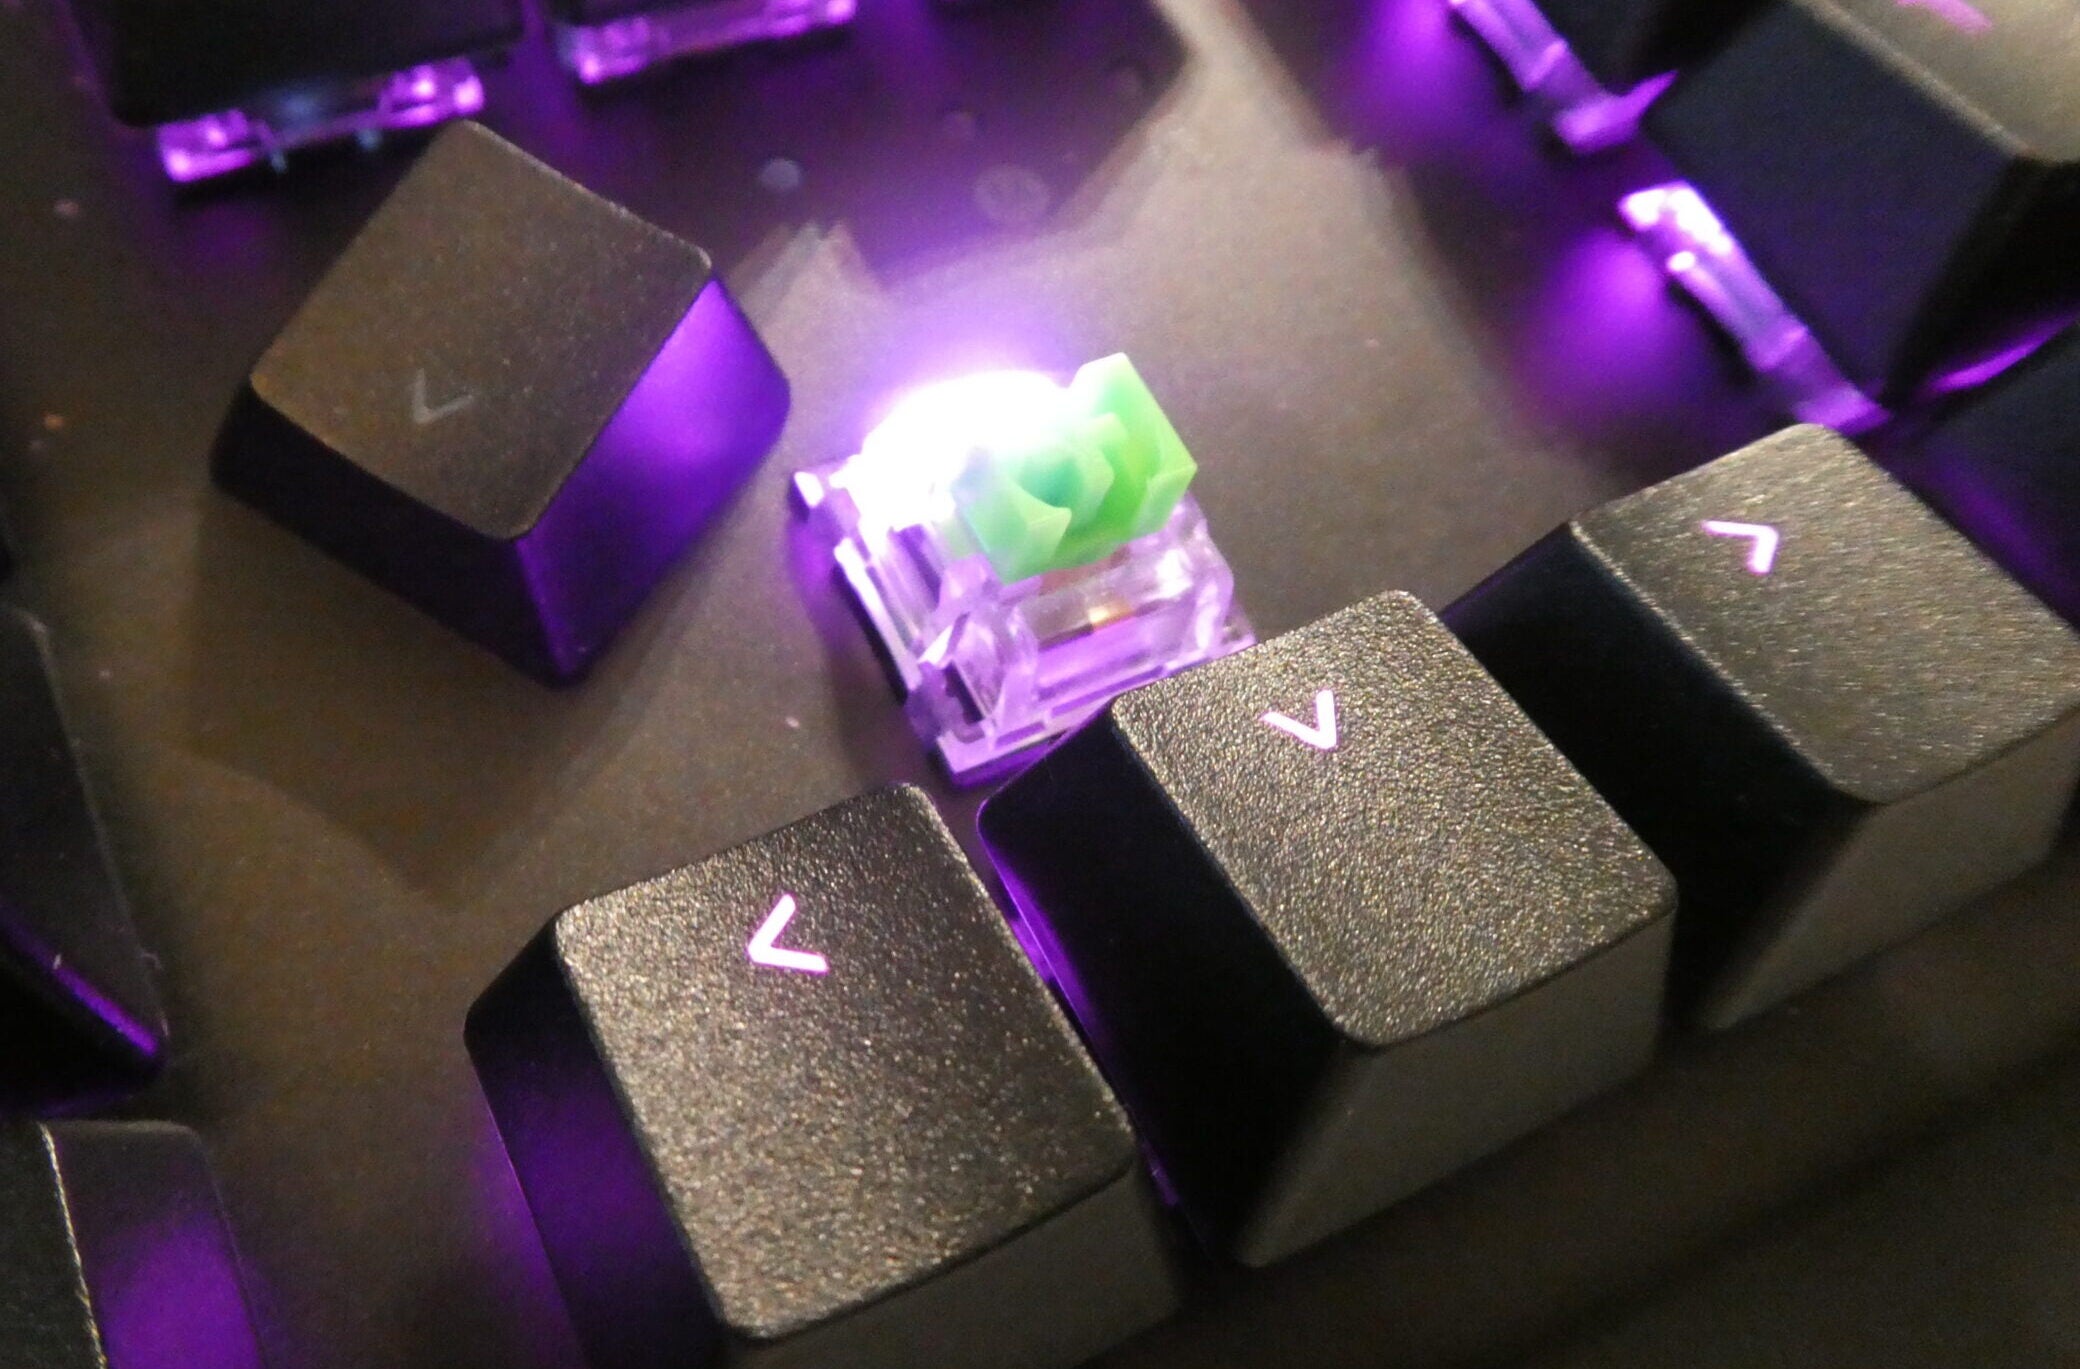 Close up image of a removed key from a black BlackWidow V3 Pro keyboard with purple lights beneath the keys